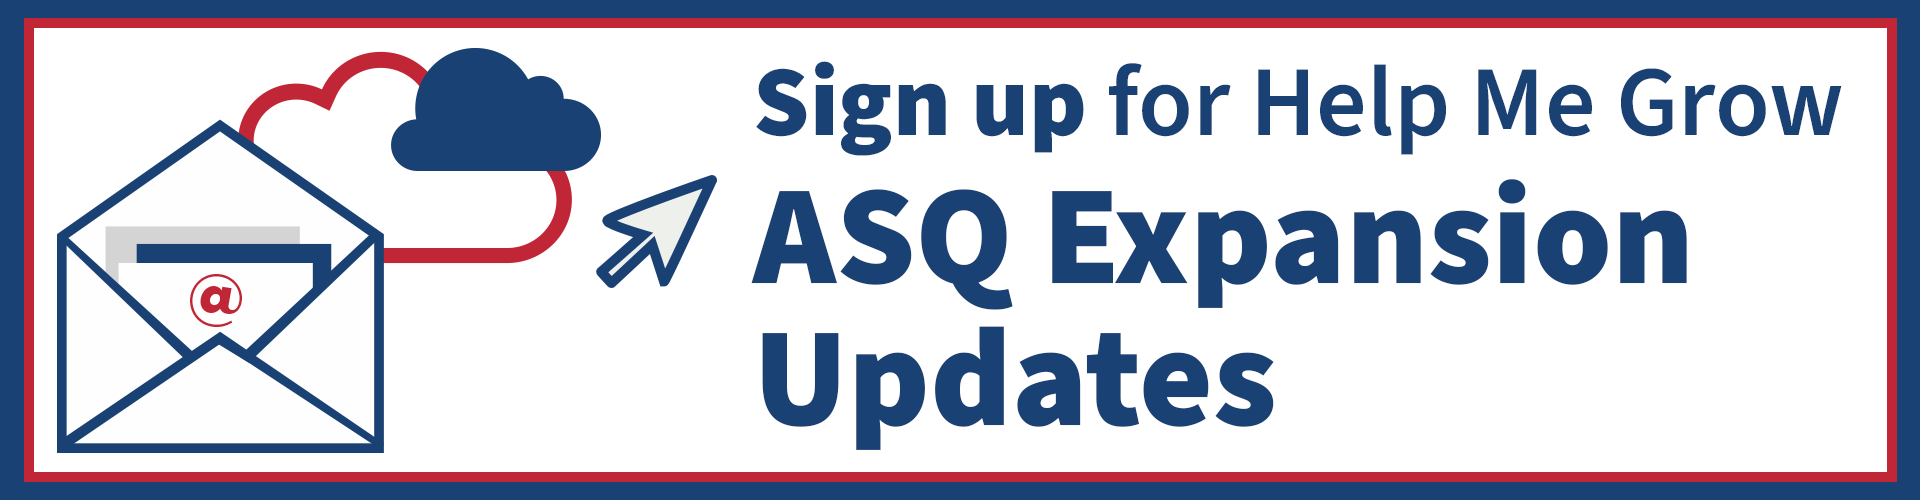 Subscribe to ASQ newsletter